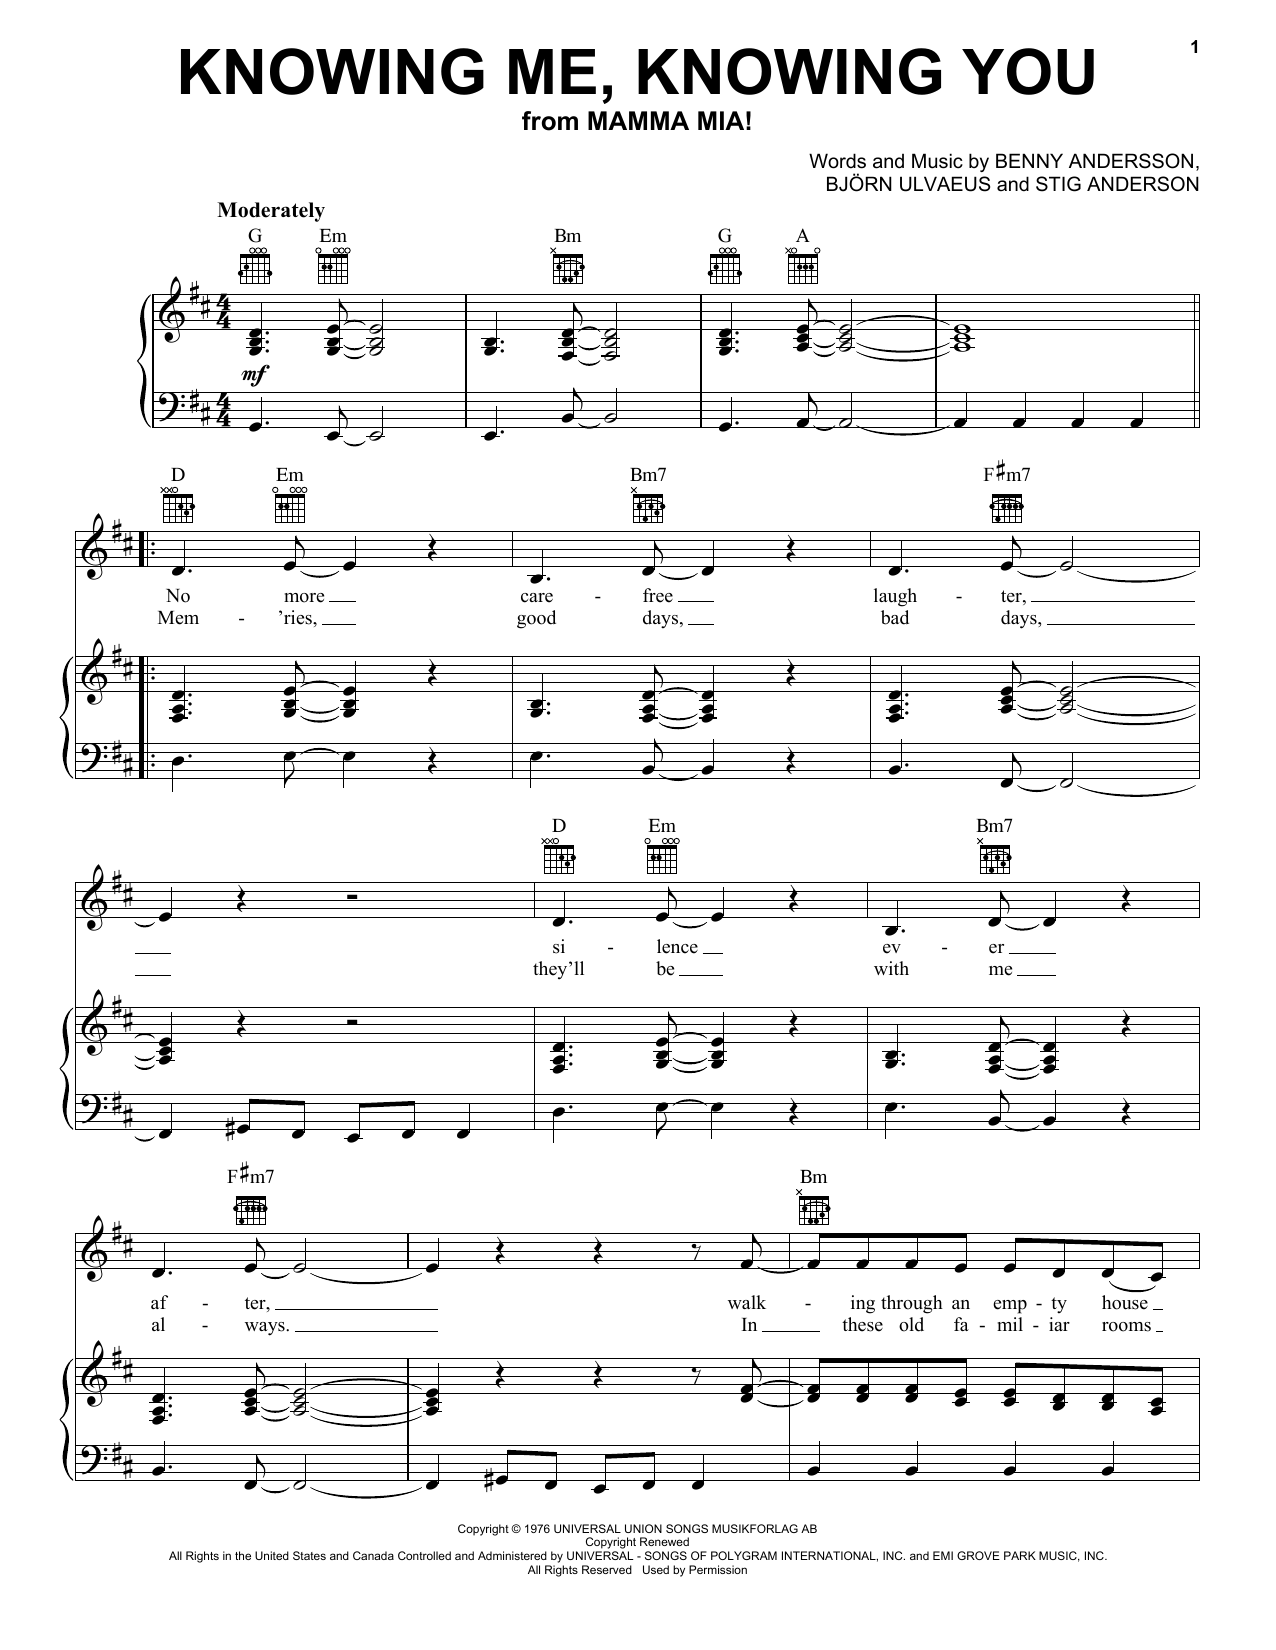 Download ABBA Knowing Me, Knowing You Sheet Music